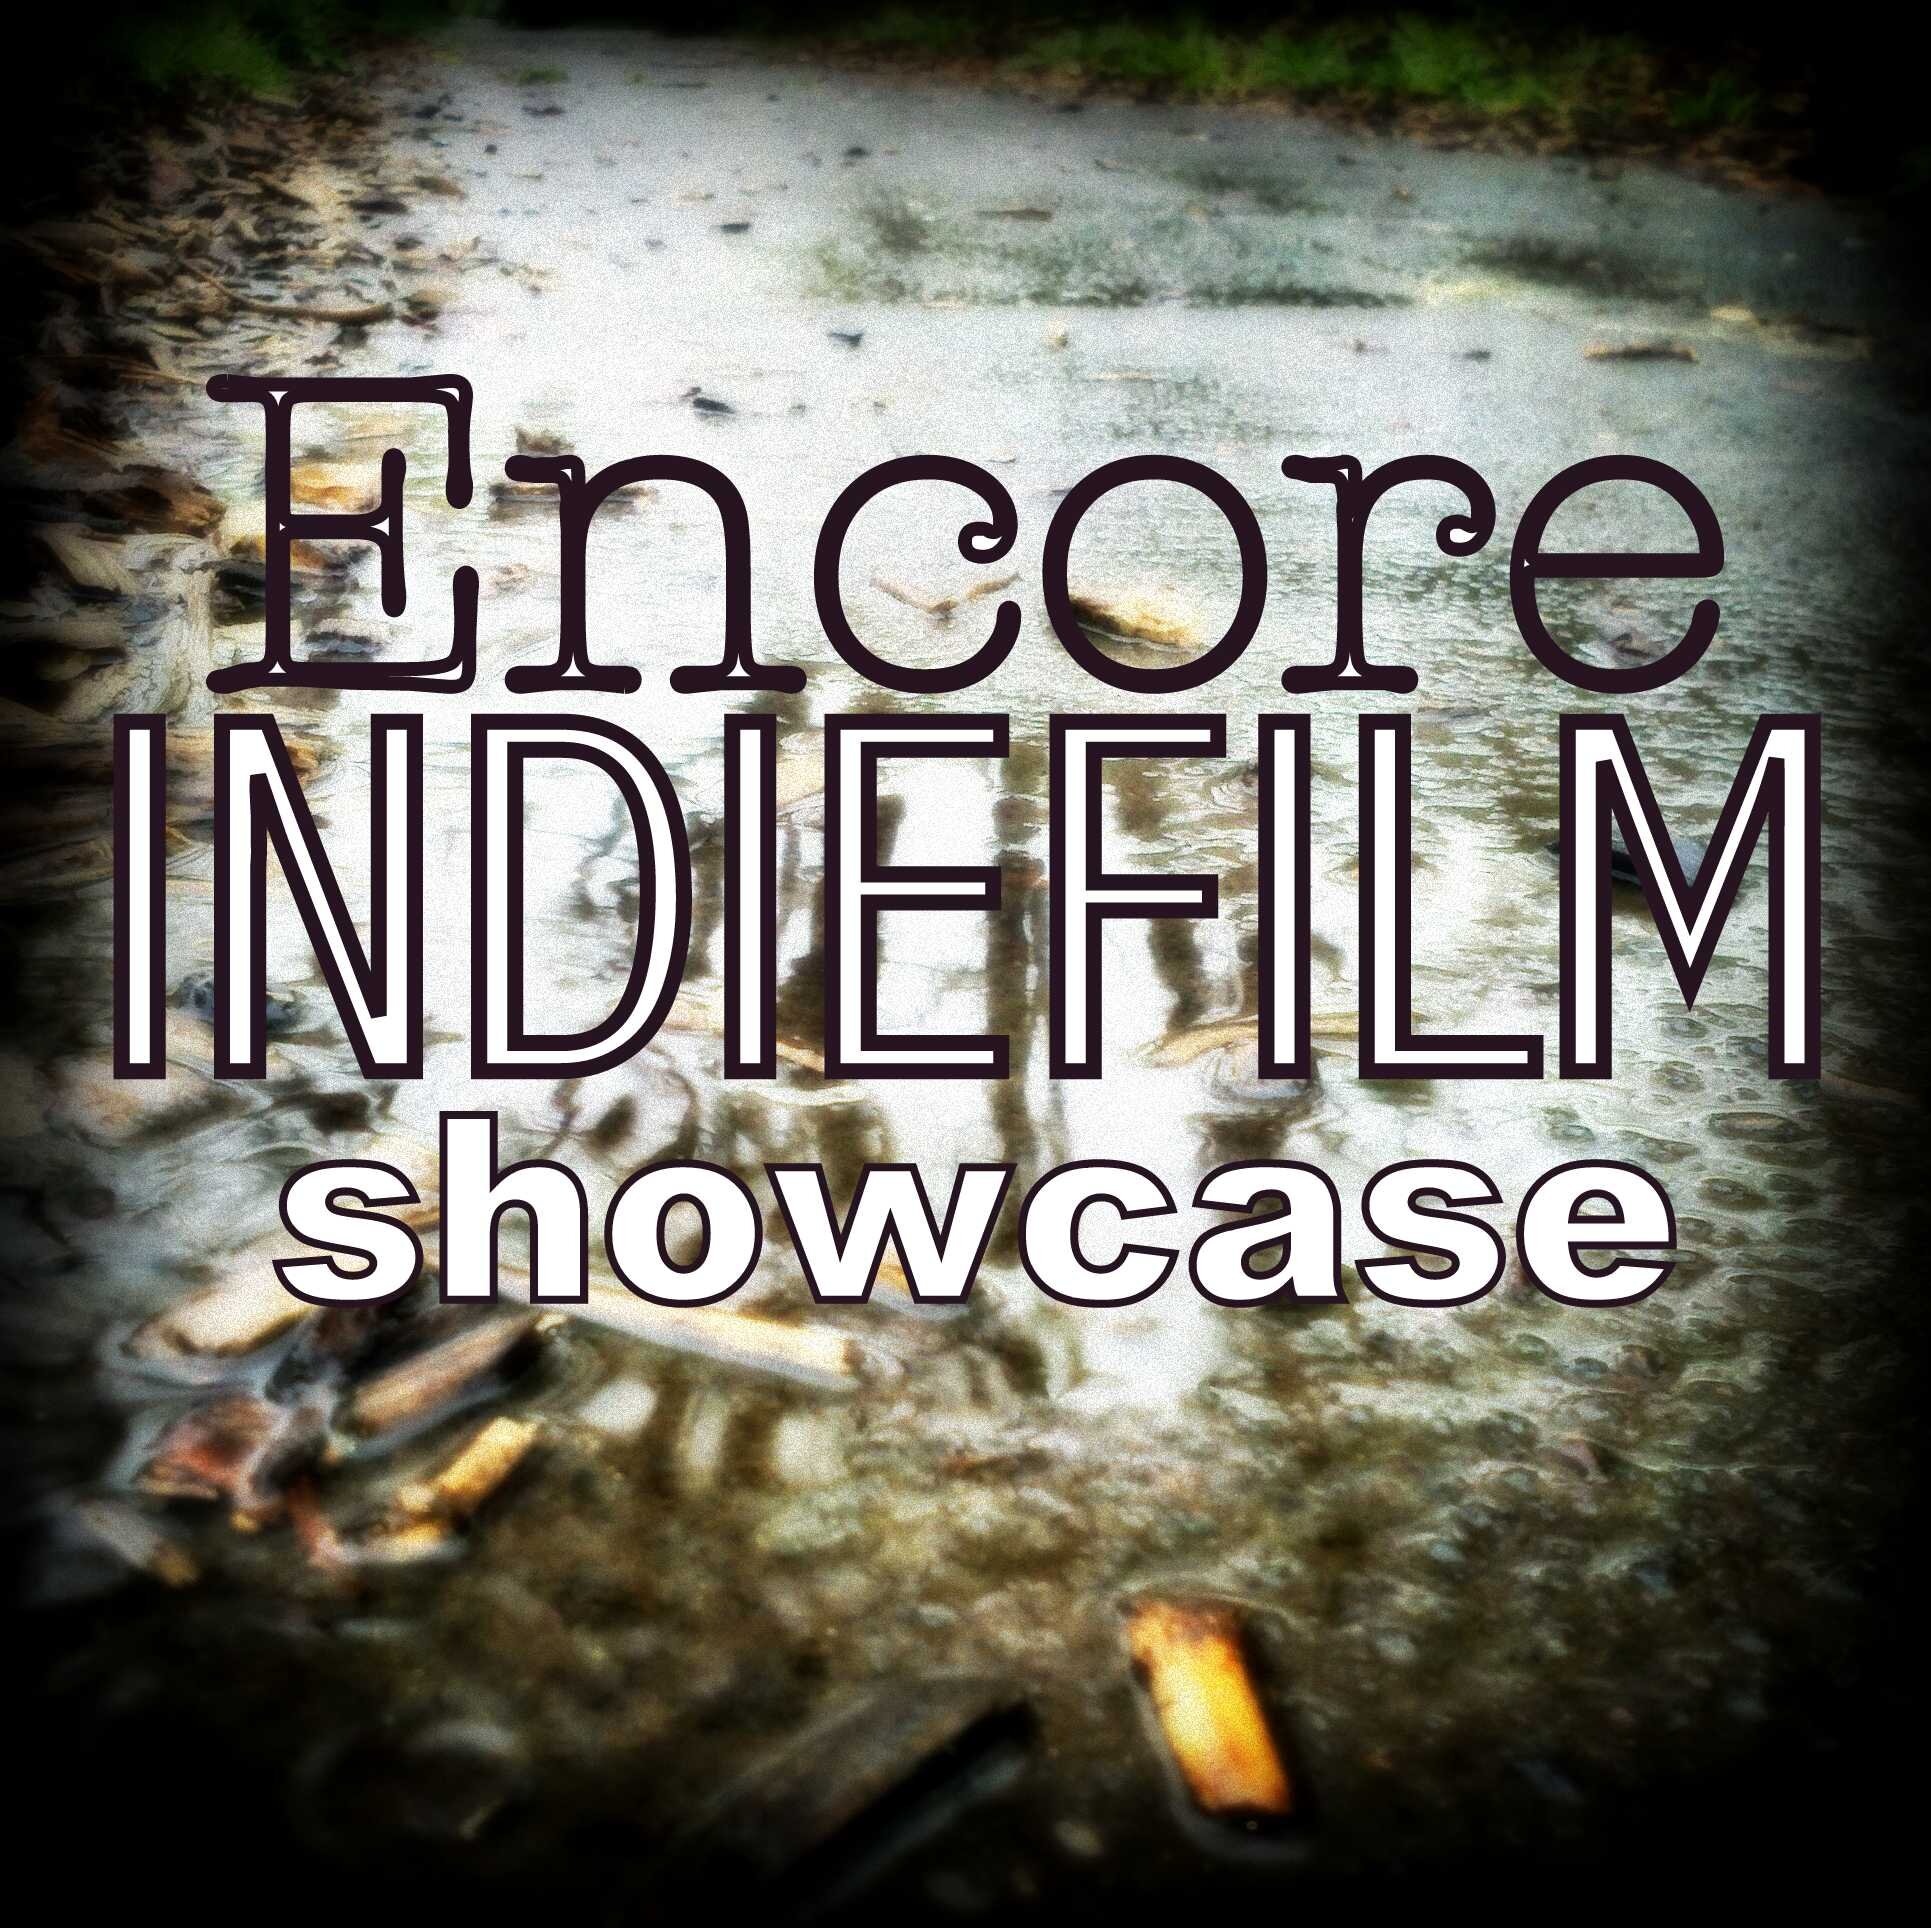 @EncoreShowcase quarterly #indiefilm screening #Portland #Oregon (currently on hiatus) Curated/hosted by @helioranafilm featuring visiting #filmmakers #PDX